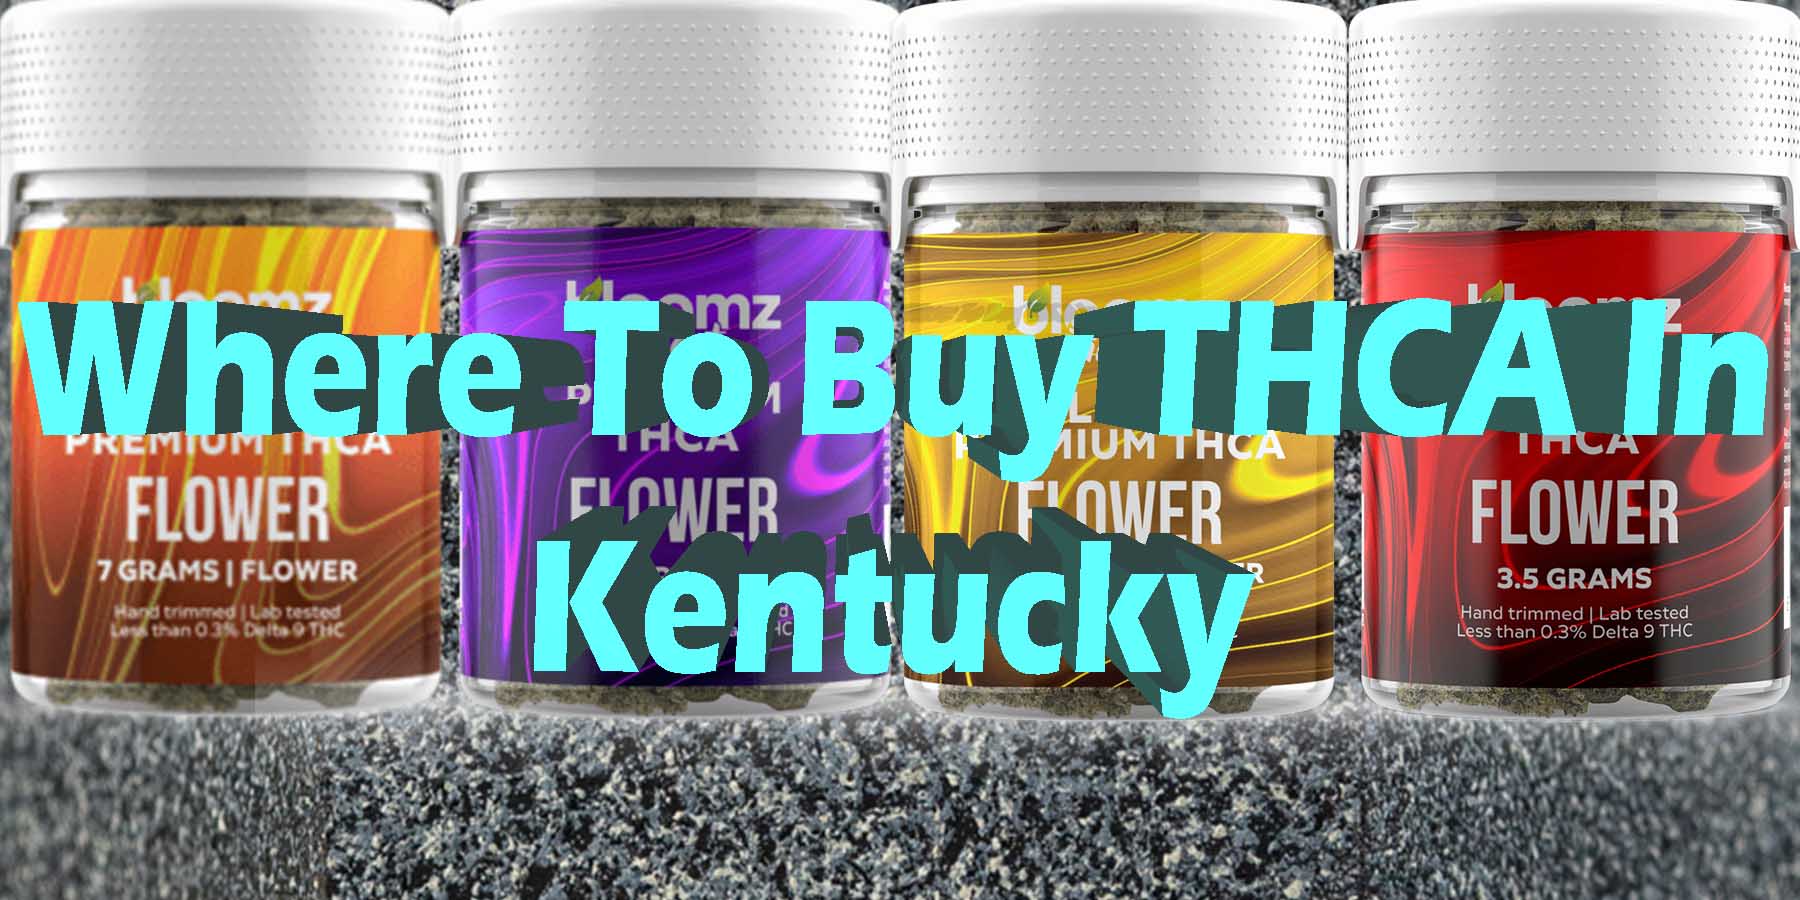 Where To Buy THCA In Kentucky WhereToGet HowToGetNearMe BestPlace LowestPrice Coupon Discount For Smoking Best High Smoke Shop Online Near Me StrongestBrand BestBrand Binoid Bloomz